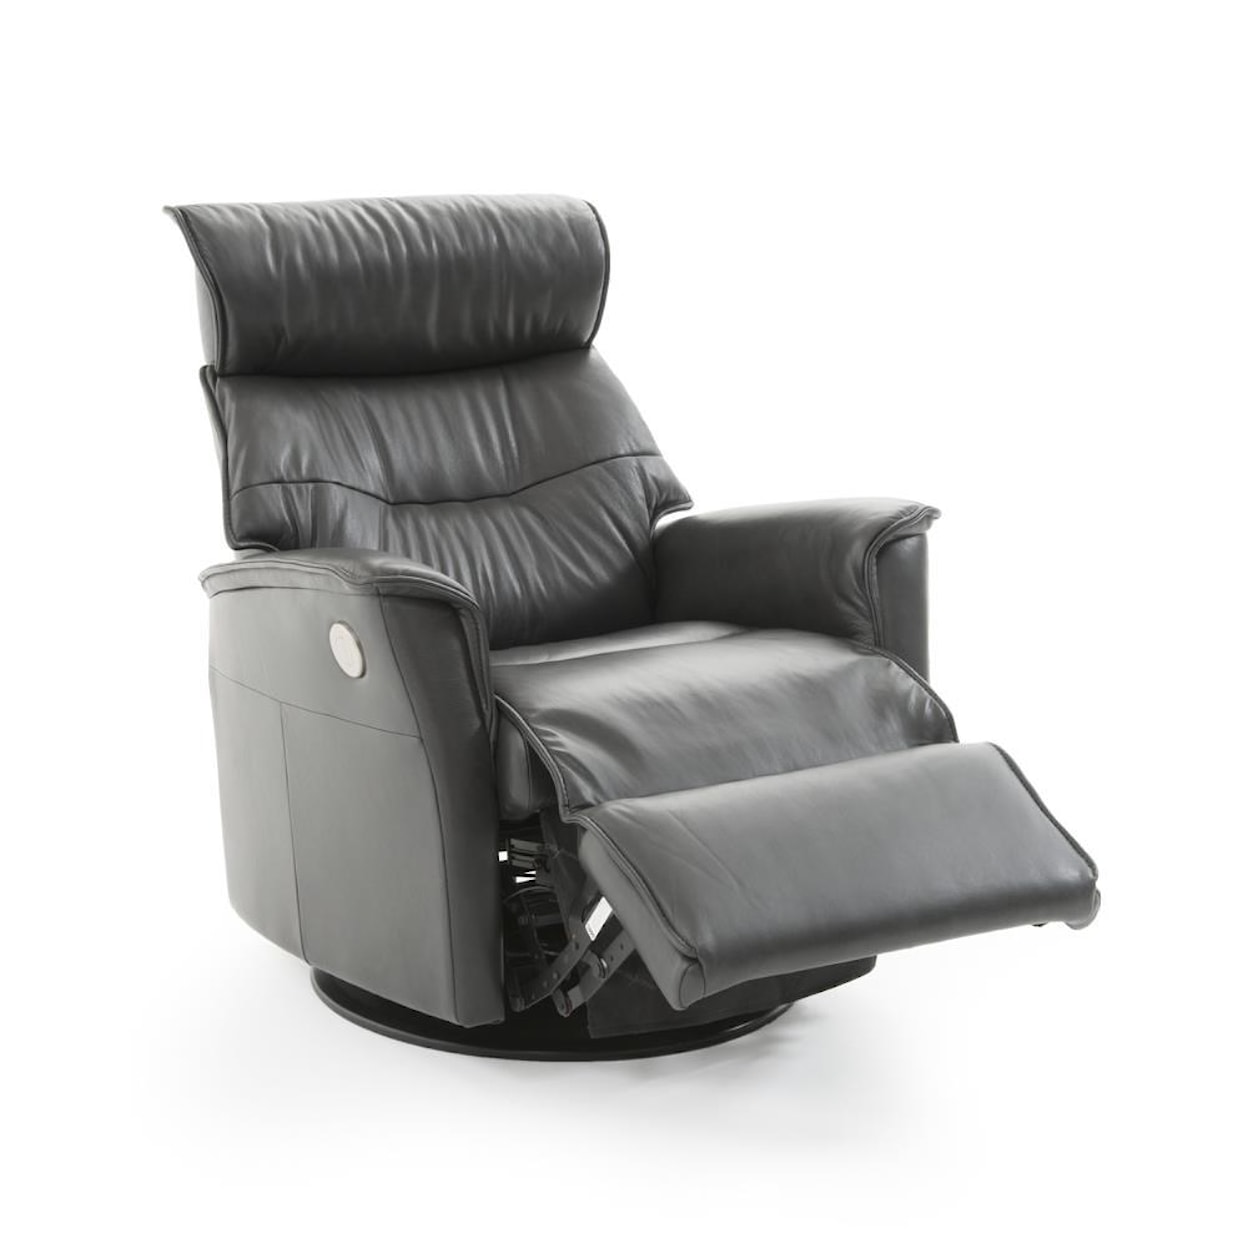 IMG Norway Captain Large Recliner with Chaise